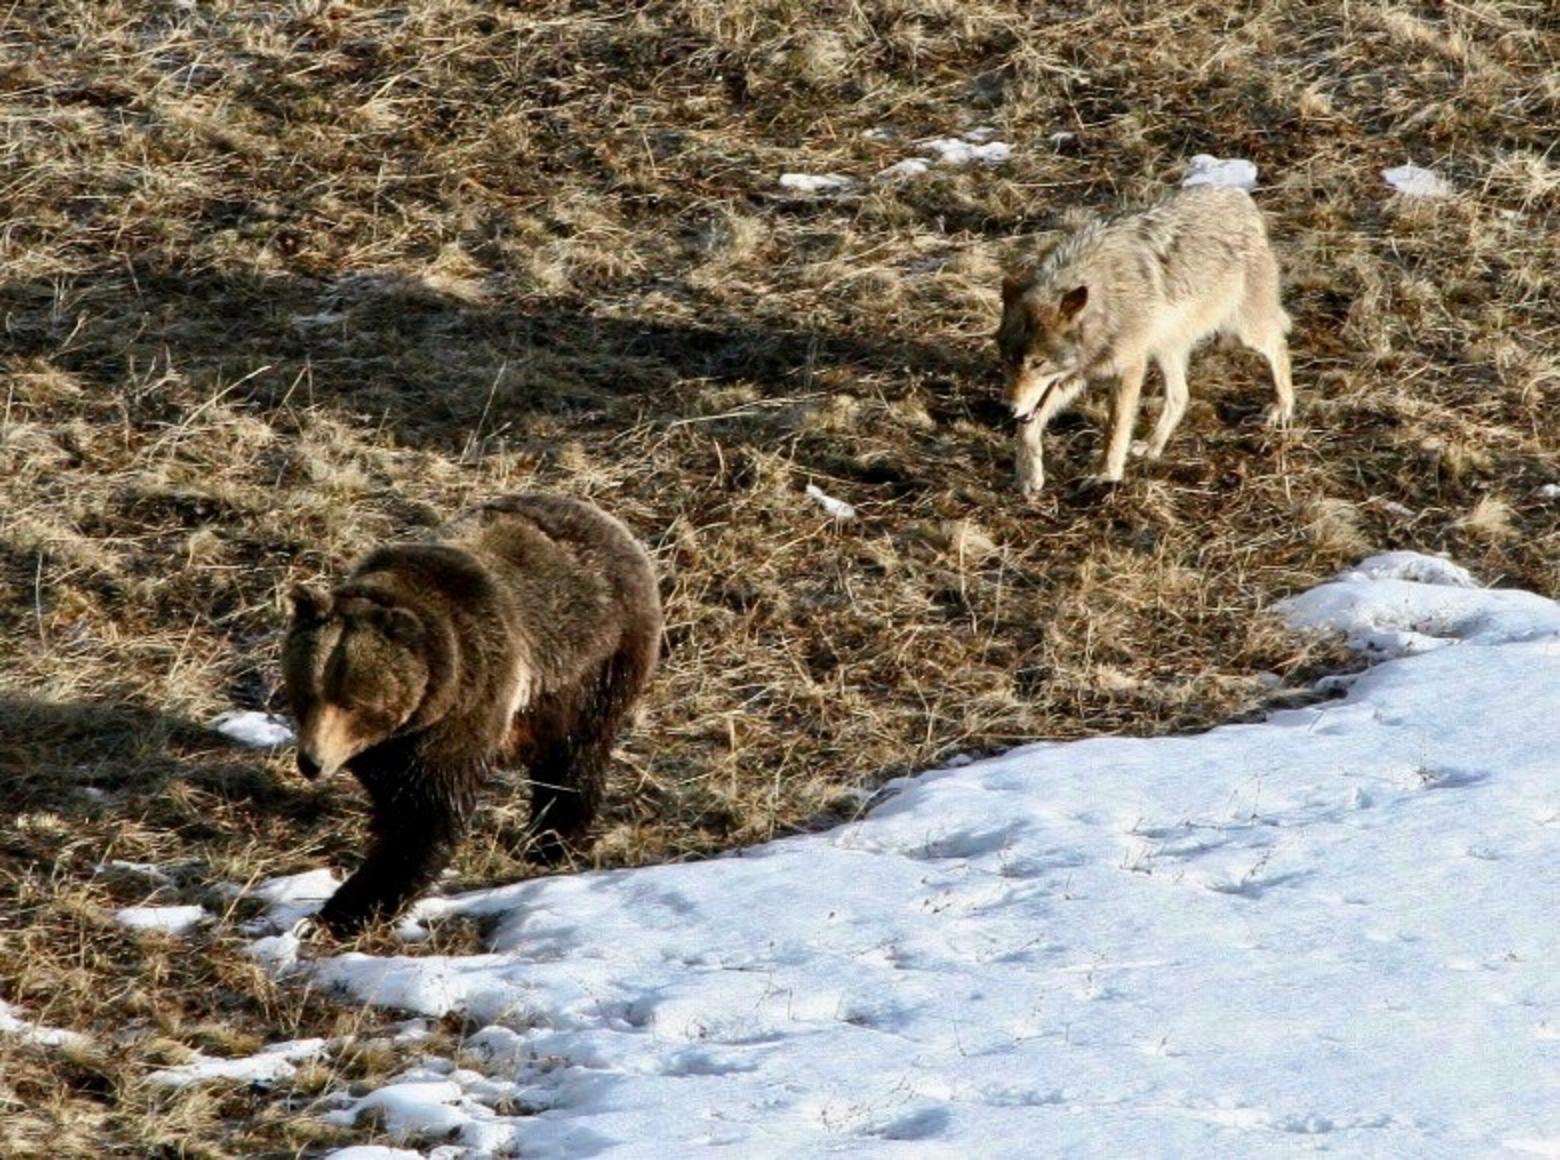 The presence of grizzlies and wolves in Montana, Wyoming and Idaho is considered a great conservation achievement that citizens should be proud of. Both species also are key attractions in a multi-billion-dollar annual nature tourism economy. Their value alive is exponentially greater than any costs they bring to the livestock industry, big game herds or wildlife management agencies. They are among the icons that also make Greater Yellowstone a bastion and bellwether for biodiversity. Photo courtesy Yellowstone National Park